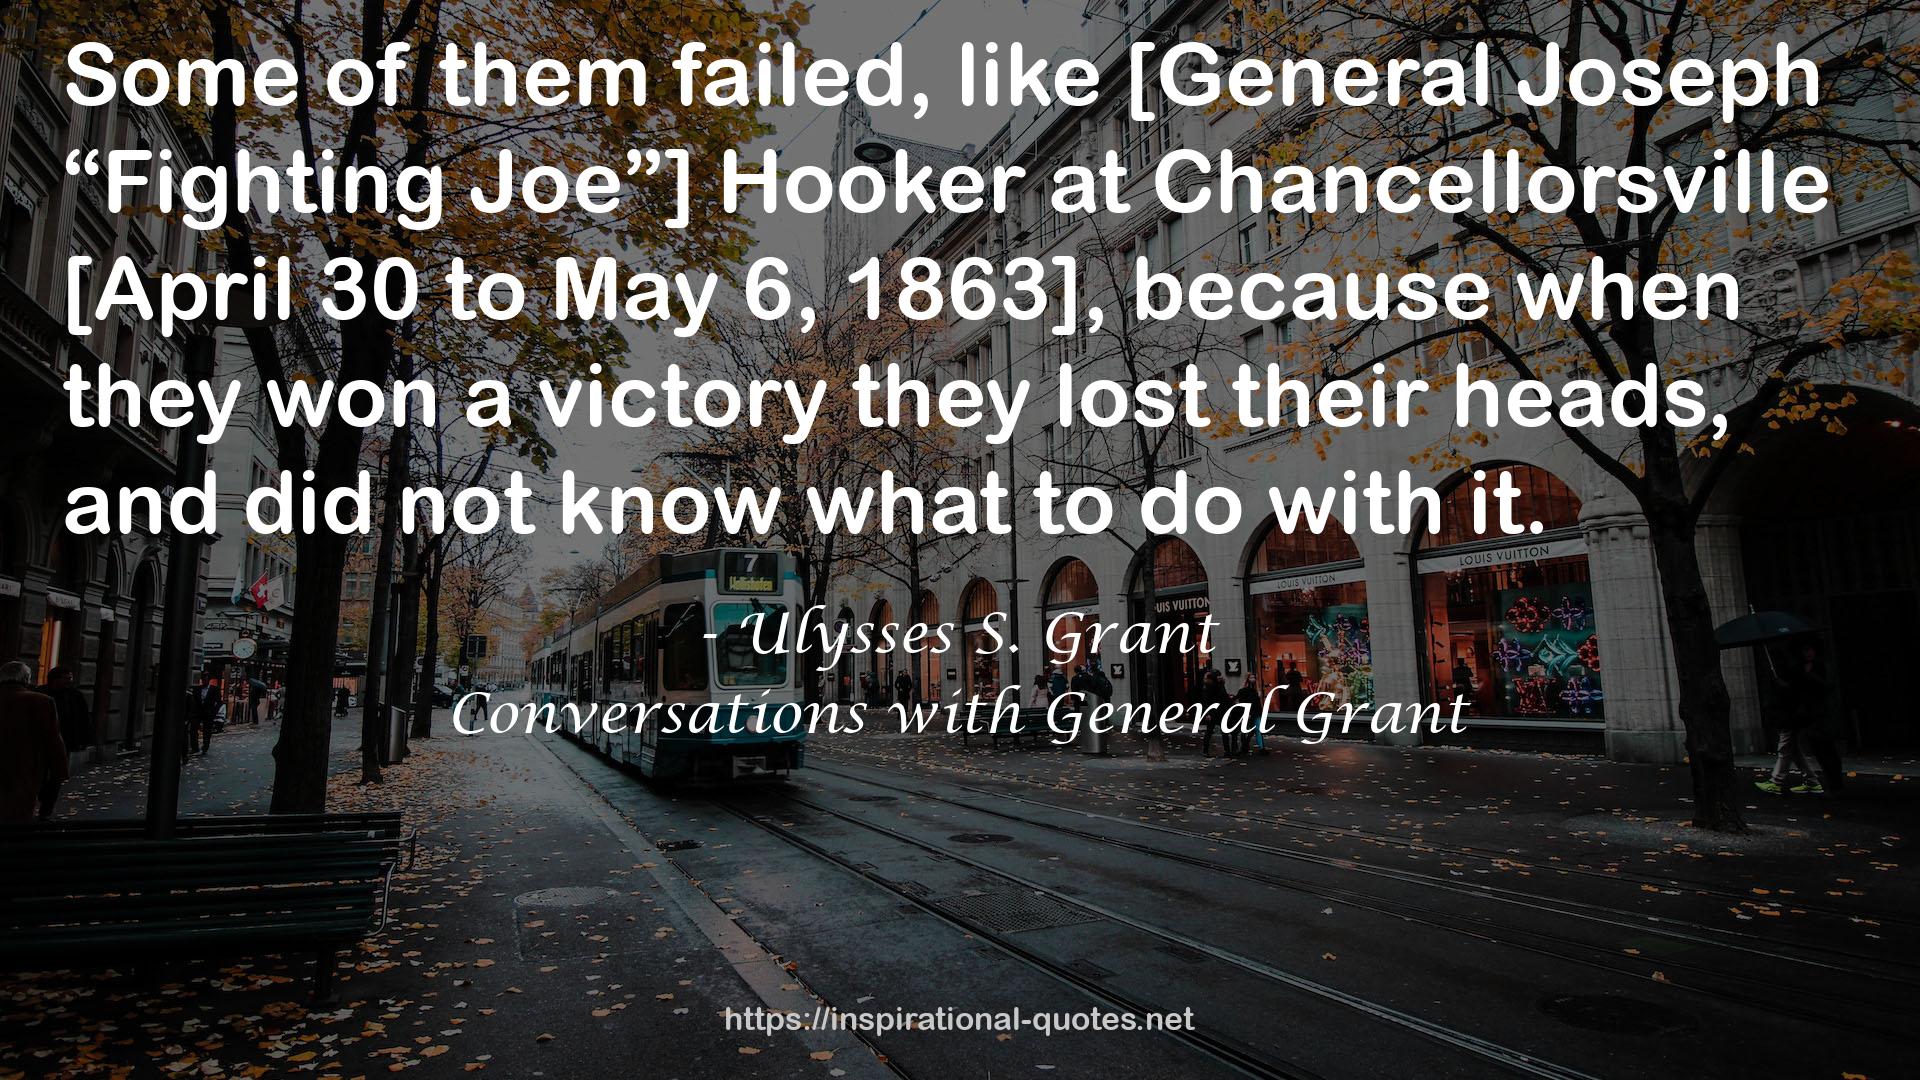 Conversations with General Grant QUOTES